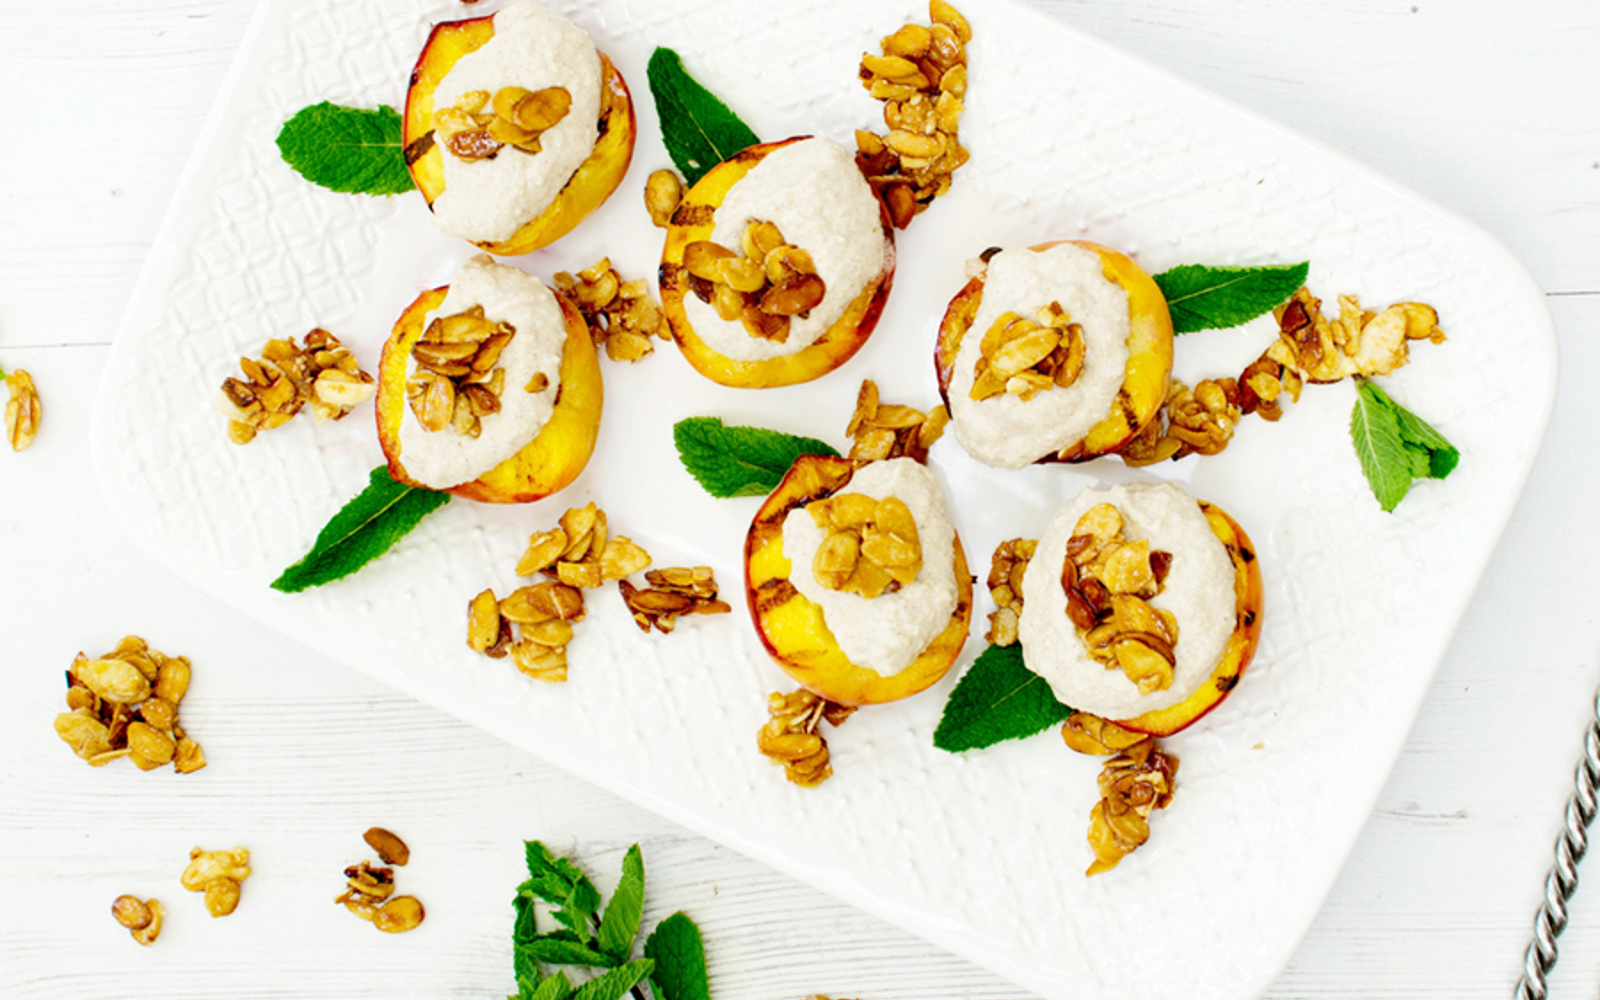 Vegan Roasted Peaches With Cashew Cinnamon Cream and Caramelized Almonds